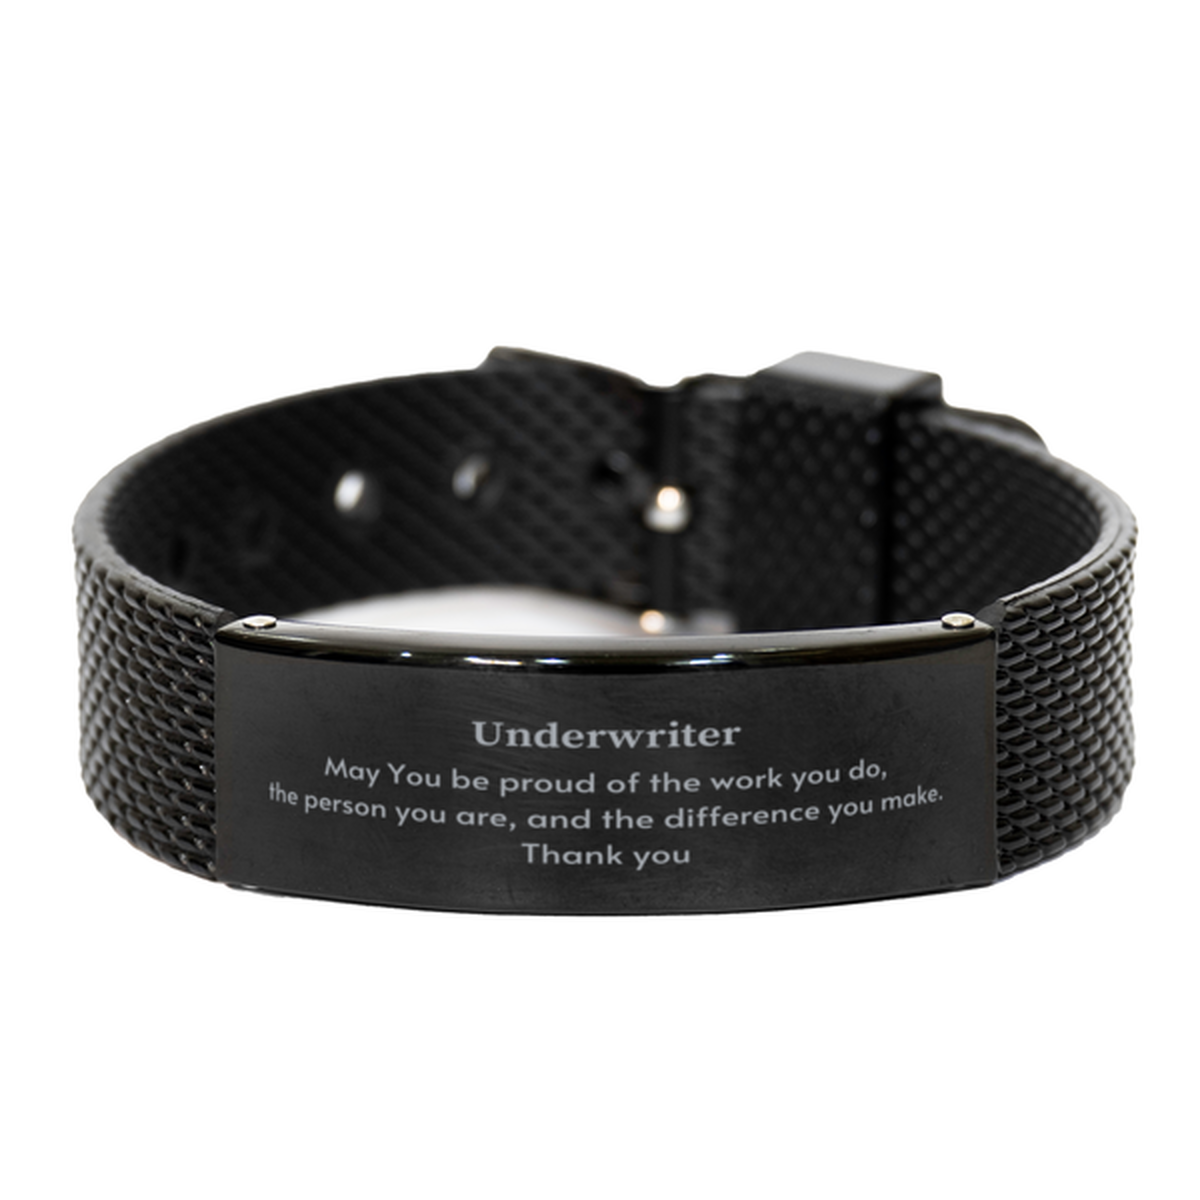 Heartwarming Black Shark Mesh Bracelet Retirement Coworkers Gifts for Underwriter, Underwriter May You be proud of the work you do, the person you are Gifts for Boss Men Women Friends